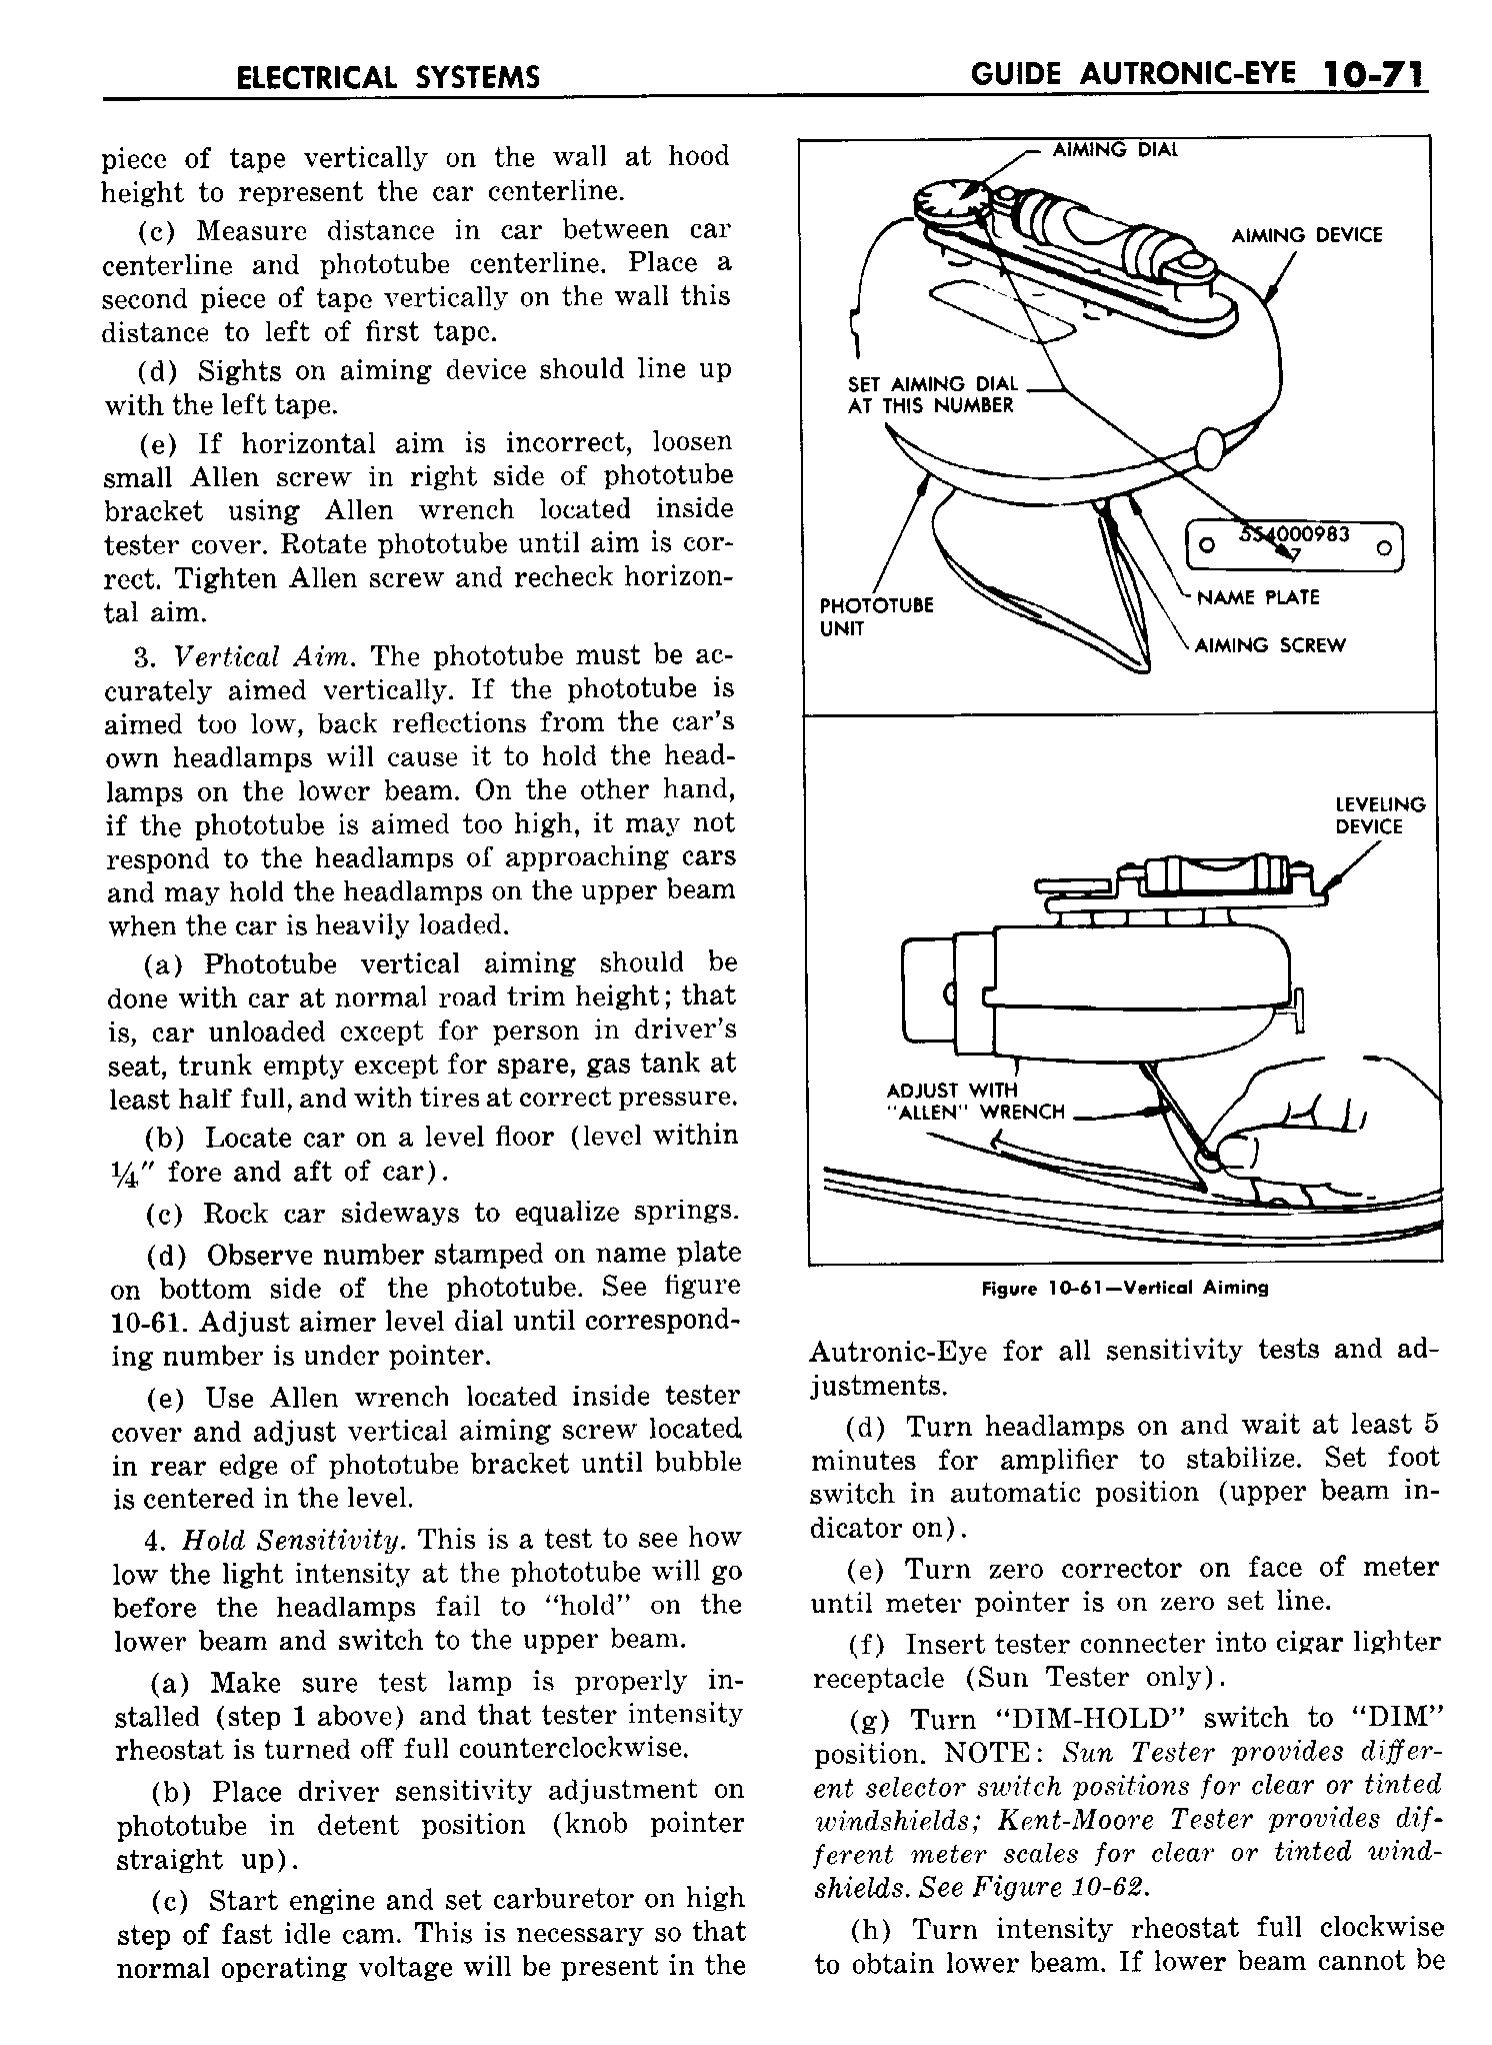 n_11 1958 Buick Shop Manual - Electrical Systems_71.jpg